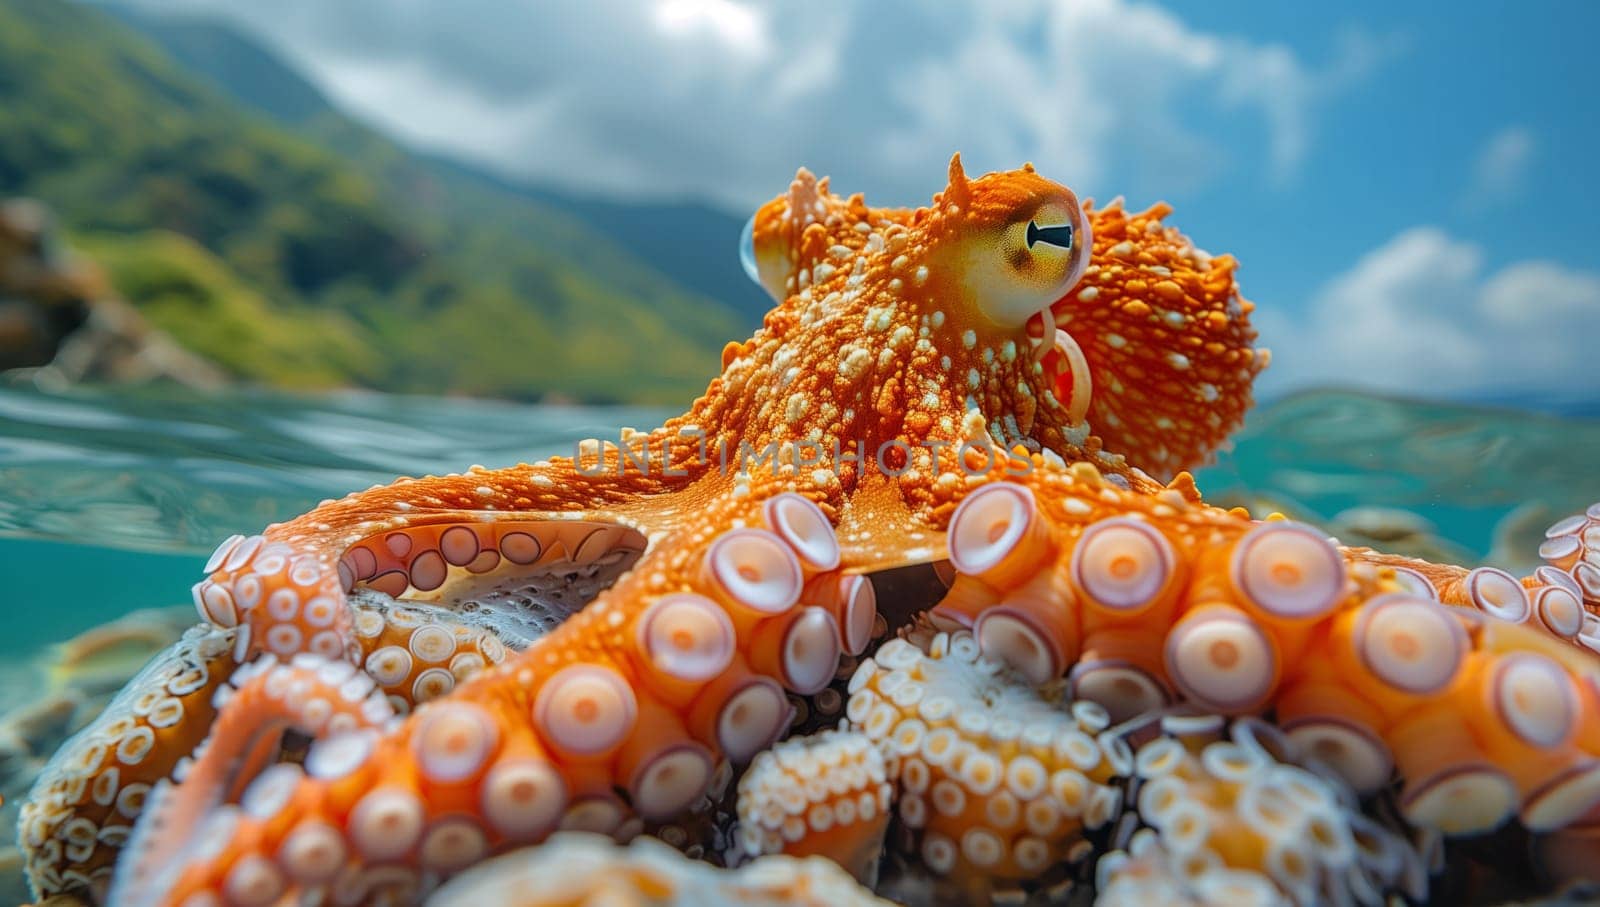 An octopus rests on rocks underwater in the ocean by richwolf